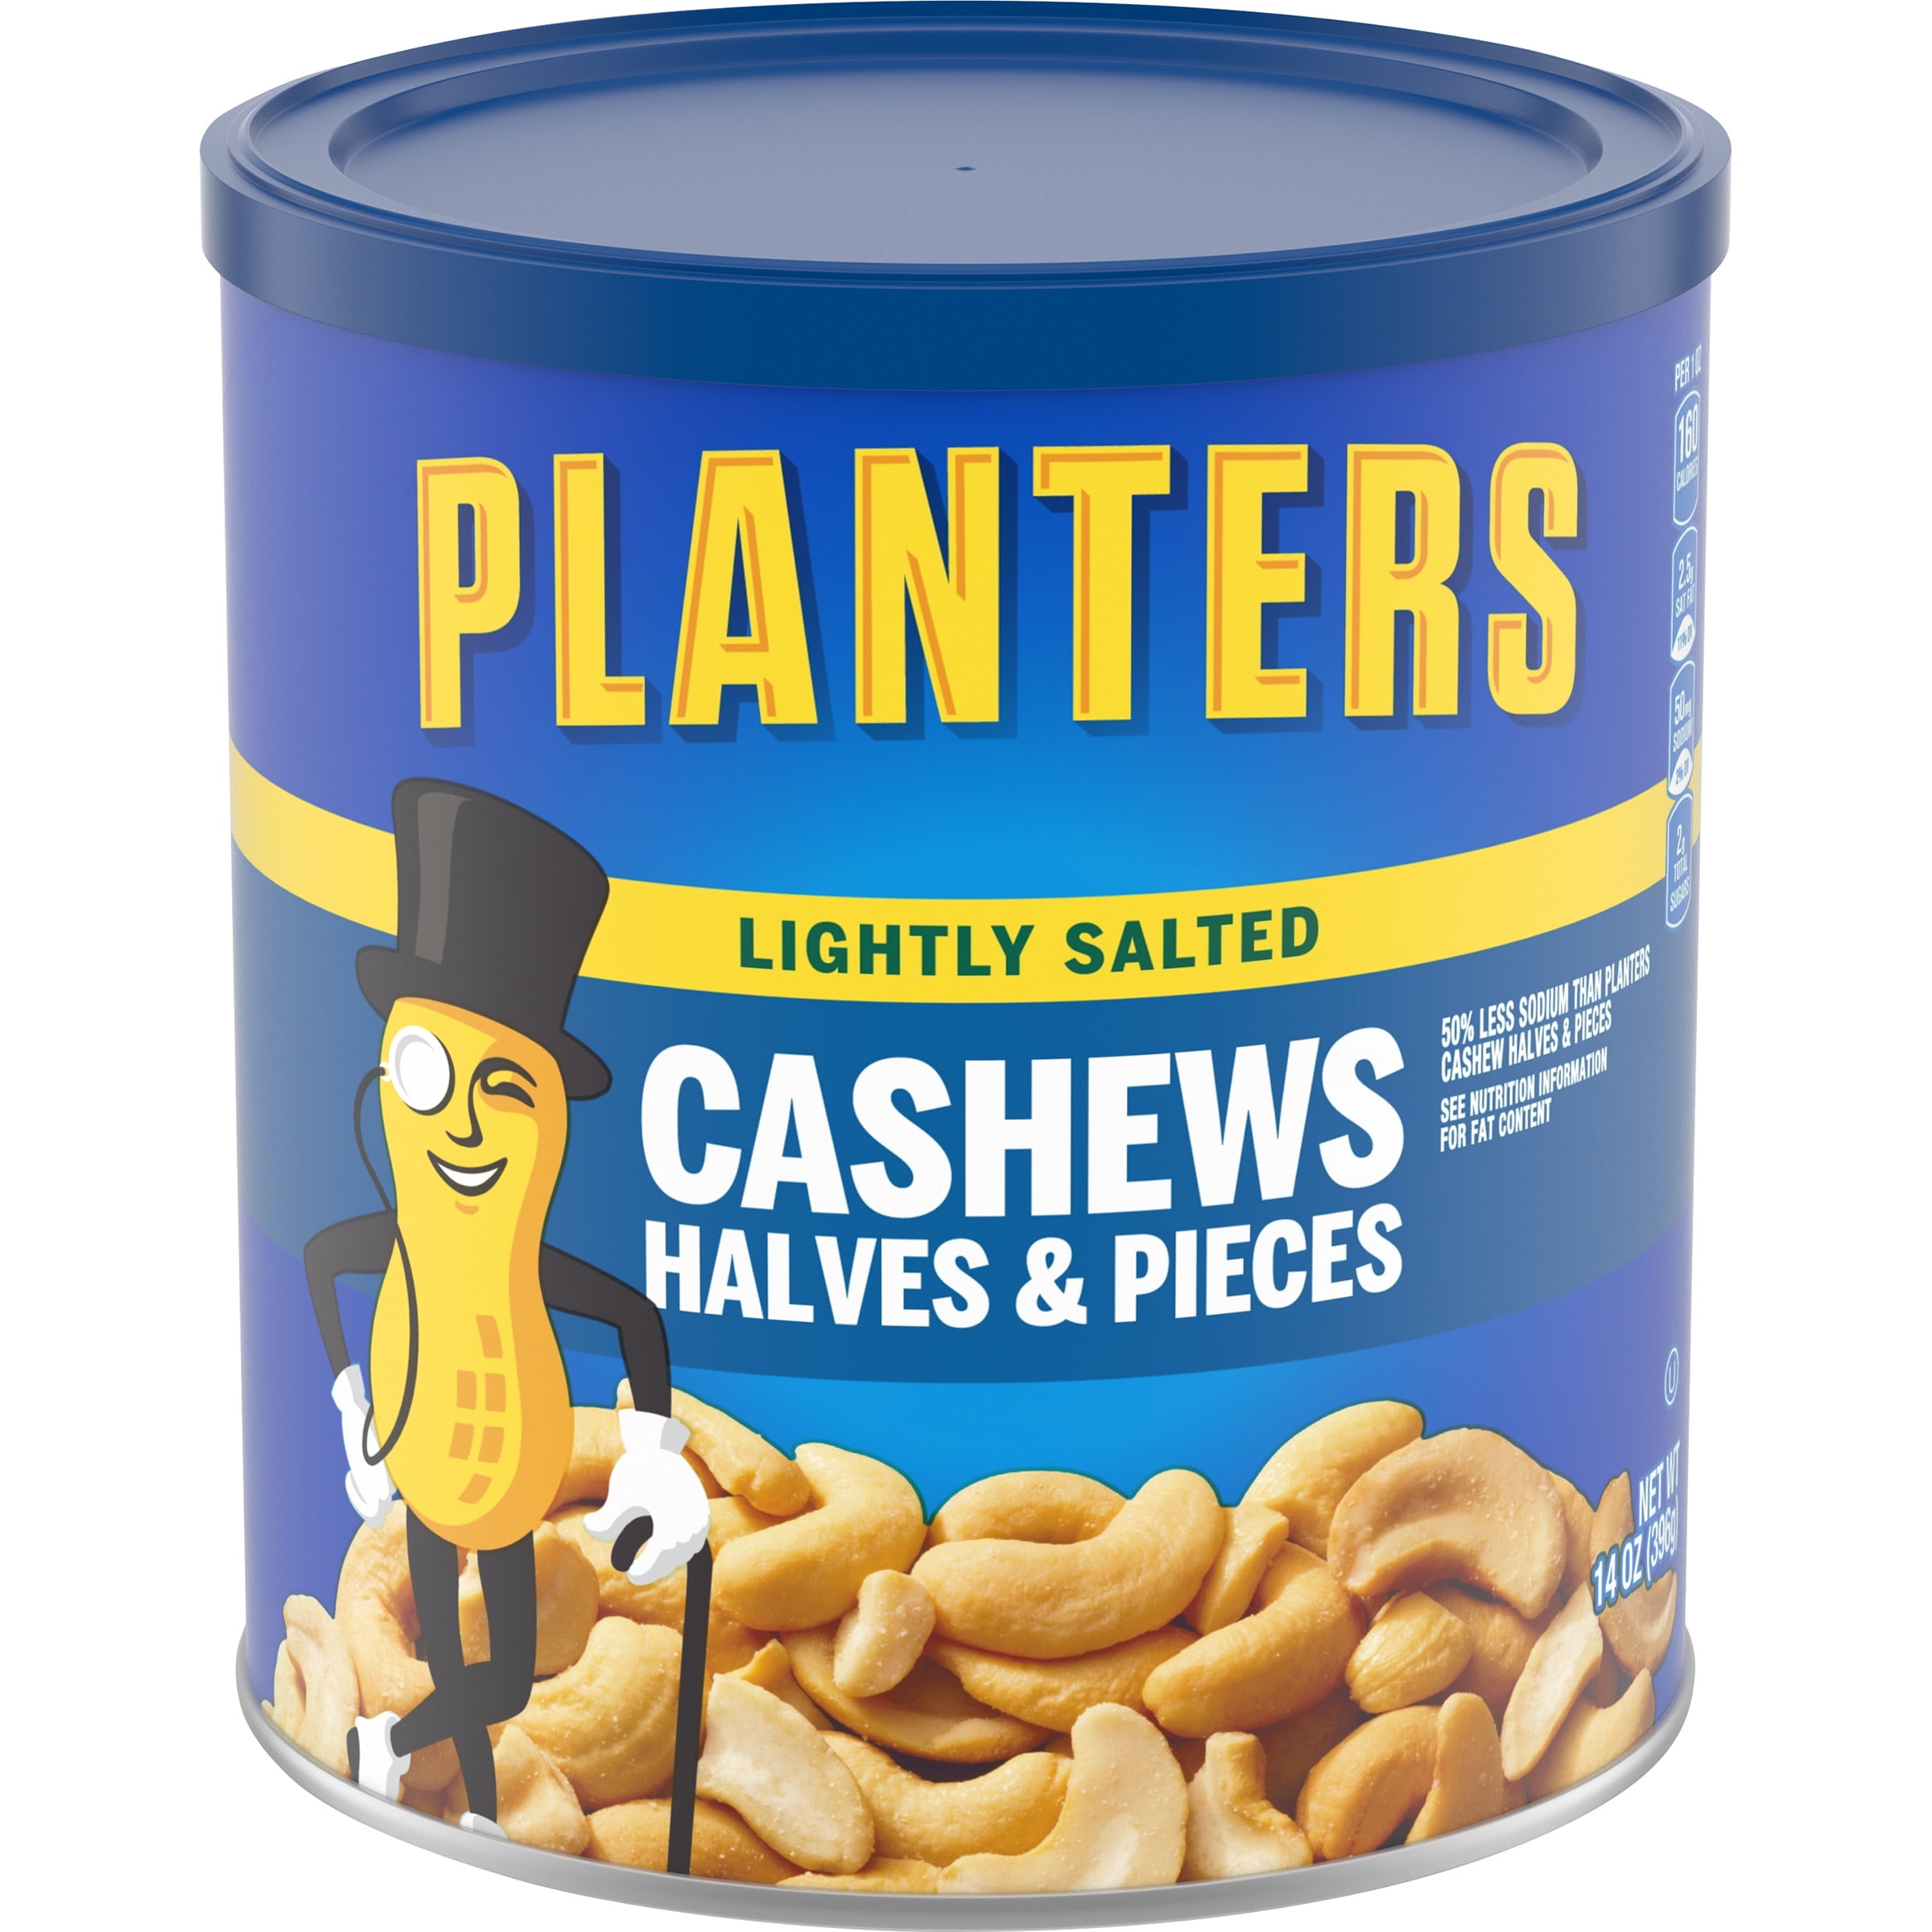 Planters Lightly Salted Cashew Halves & Pieces, 14 oz Canister